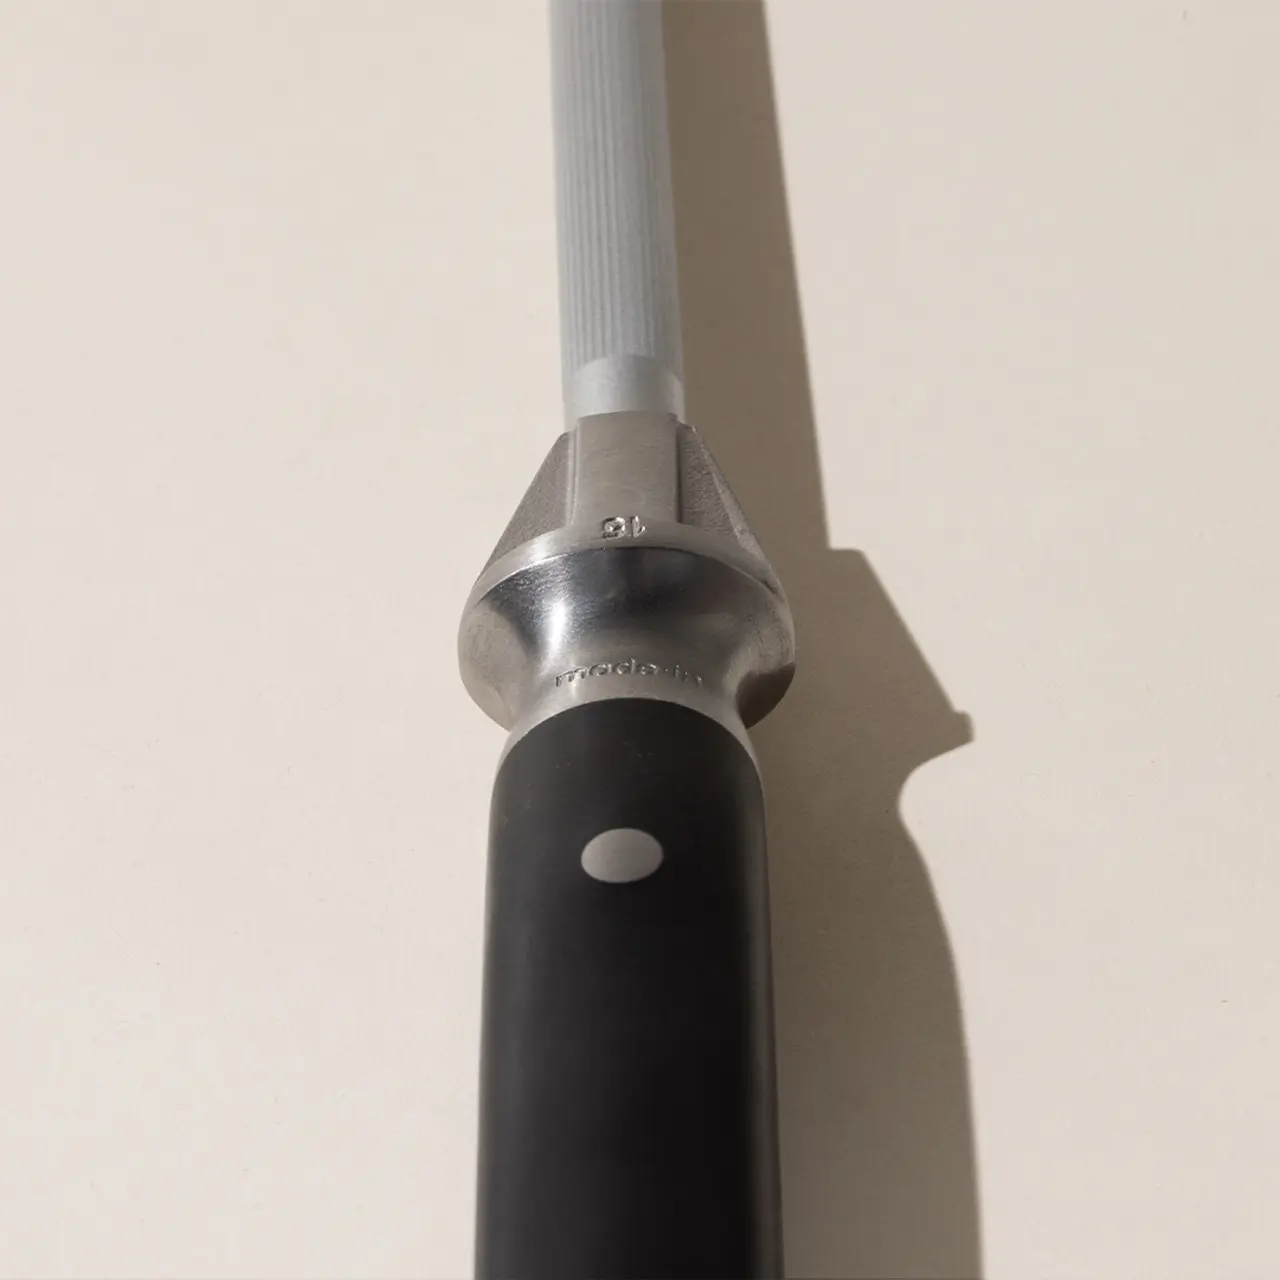 A close-up of the head of a reflex hammer with a metallic finish and a black handle casting a soft shadow on a neutral background.